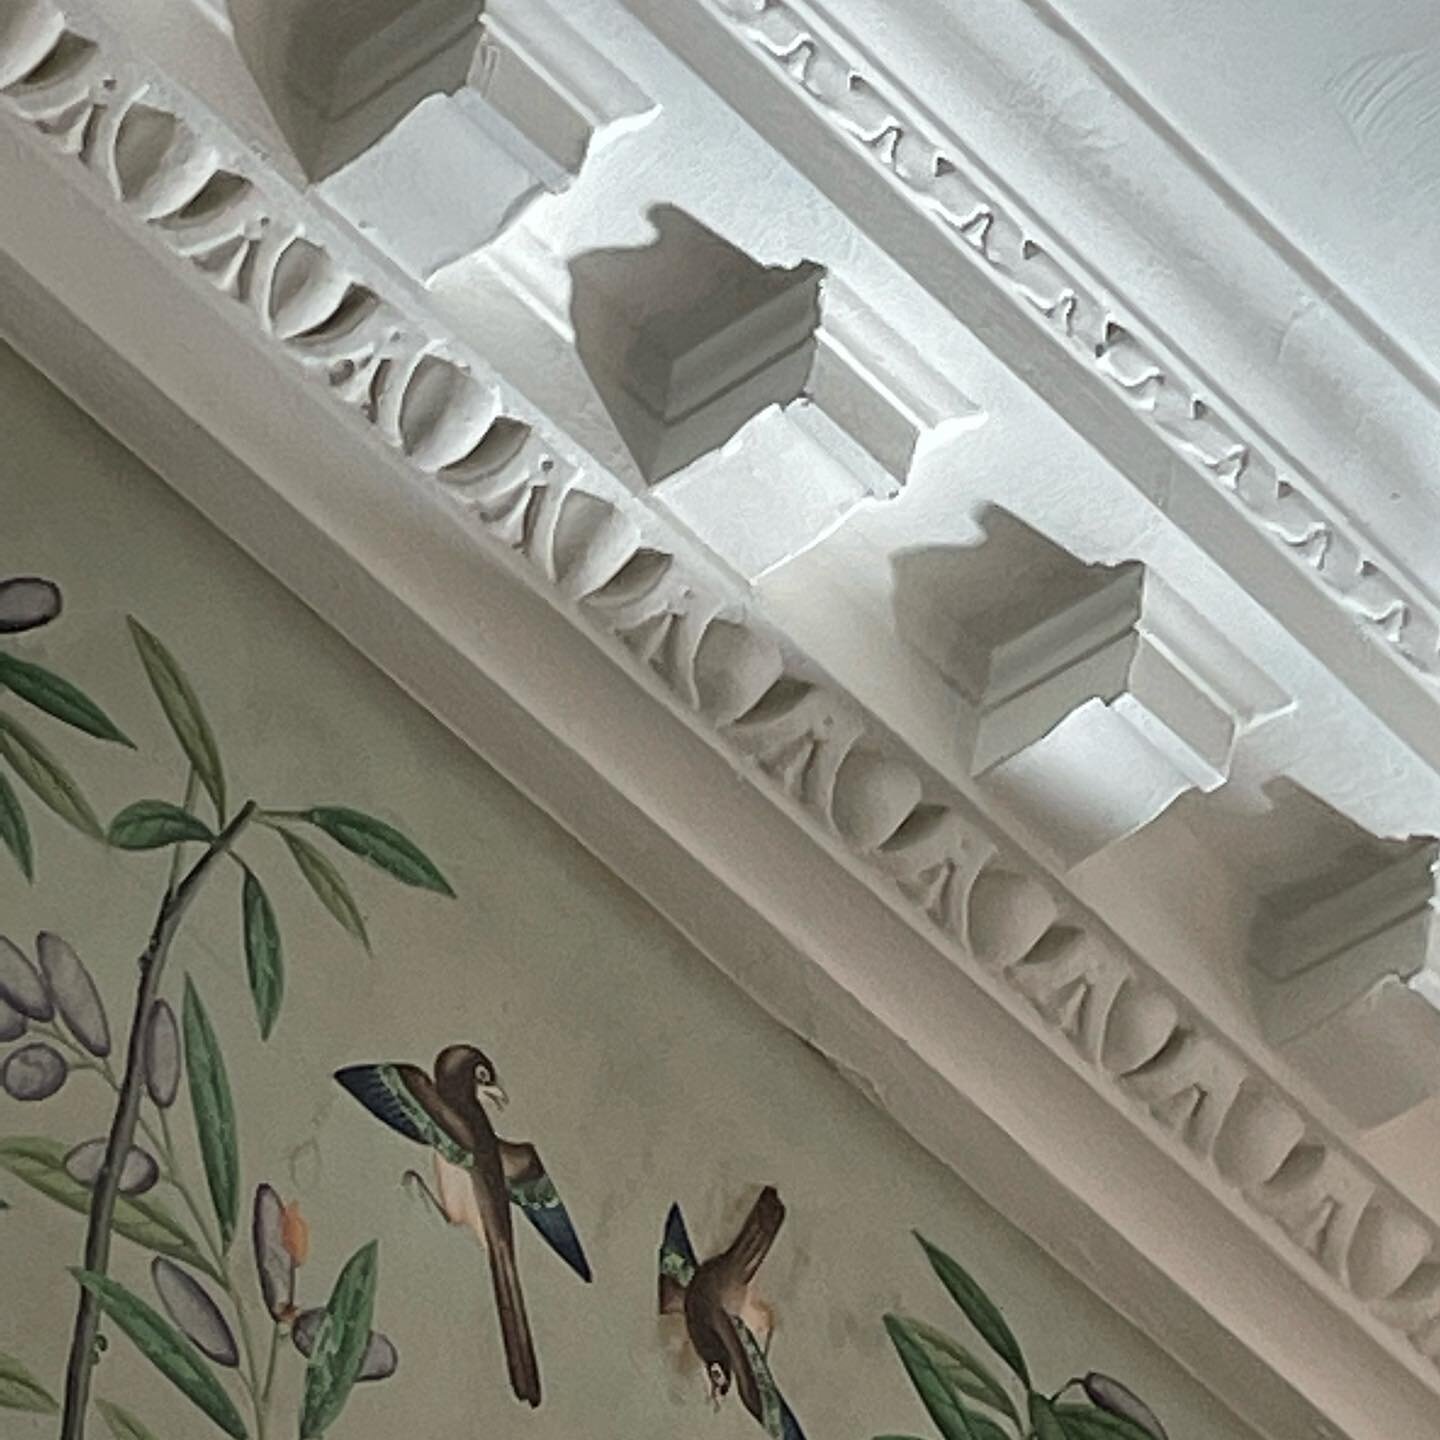 Reflected sunlight on the cornice in The Nelson Bedroom this morning. The beautiful chinoiserie wallpaper is by #watts1874.